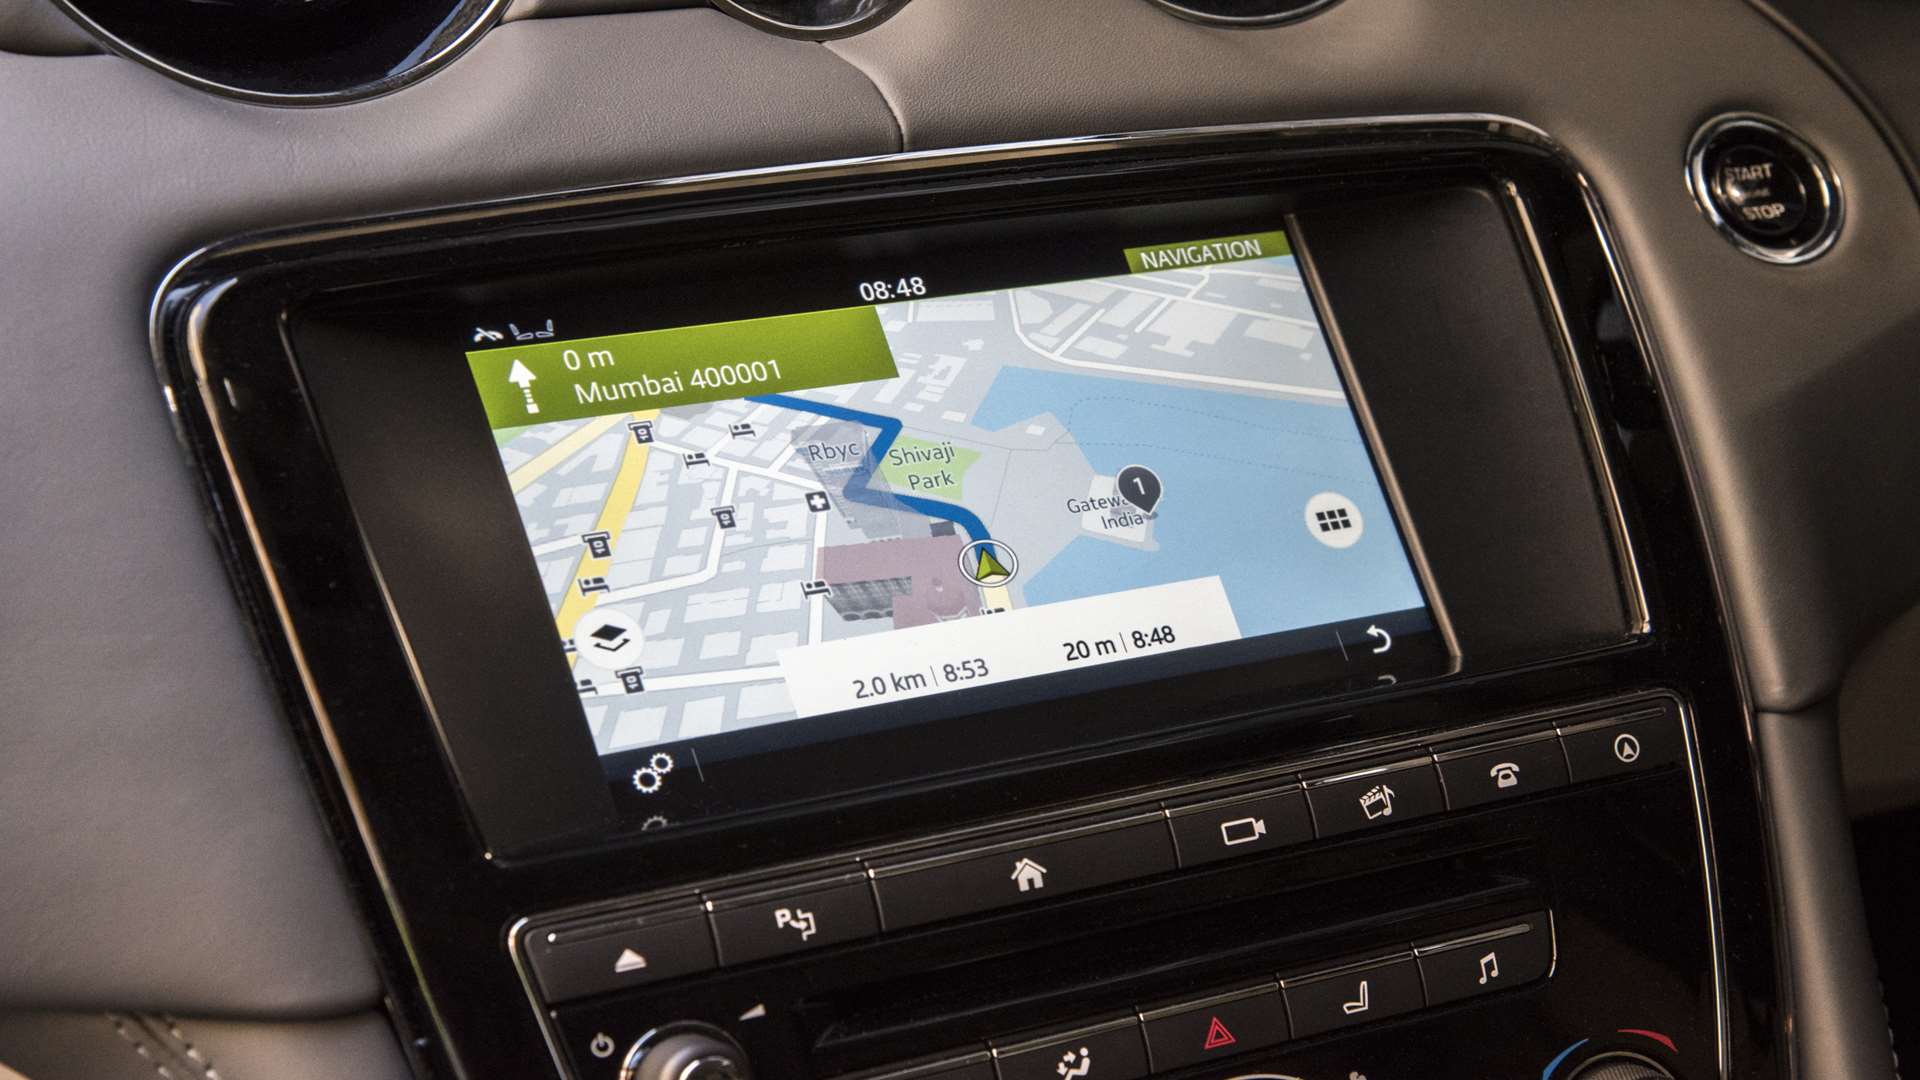 The updated infotainment system is one of the most welcome additions